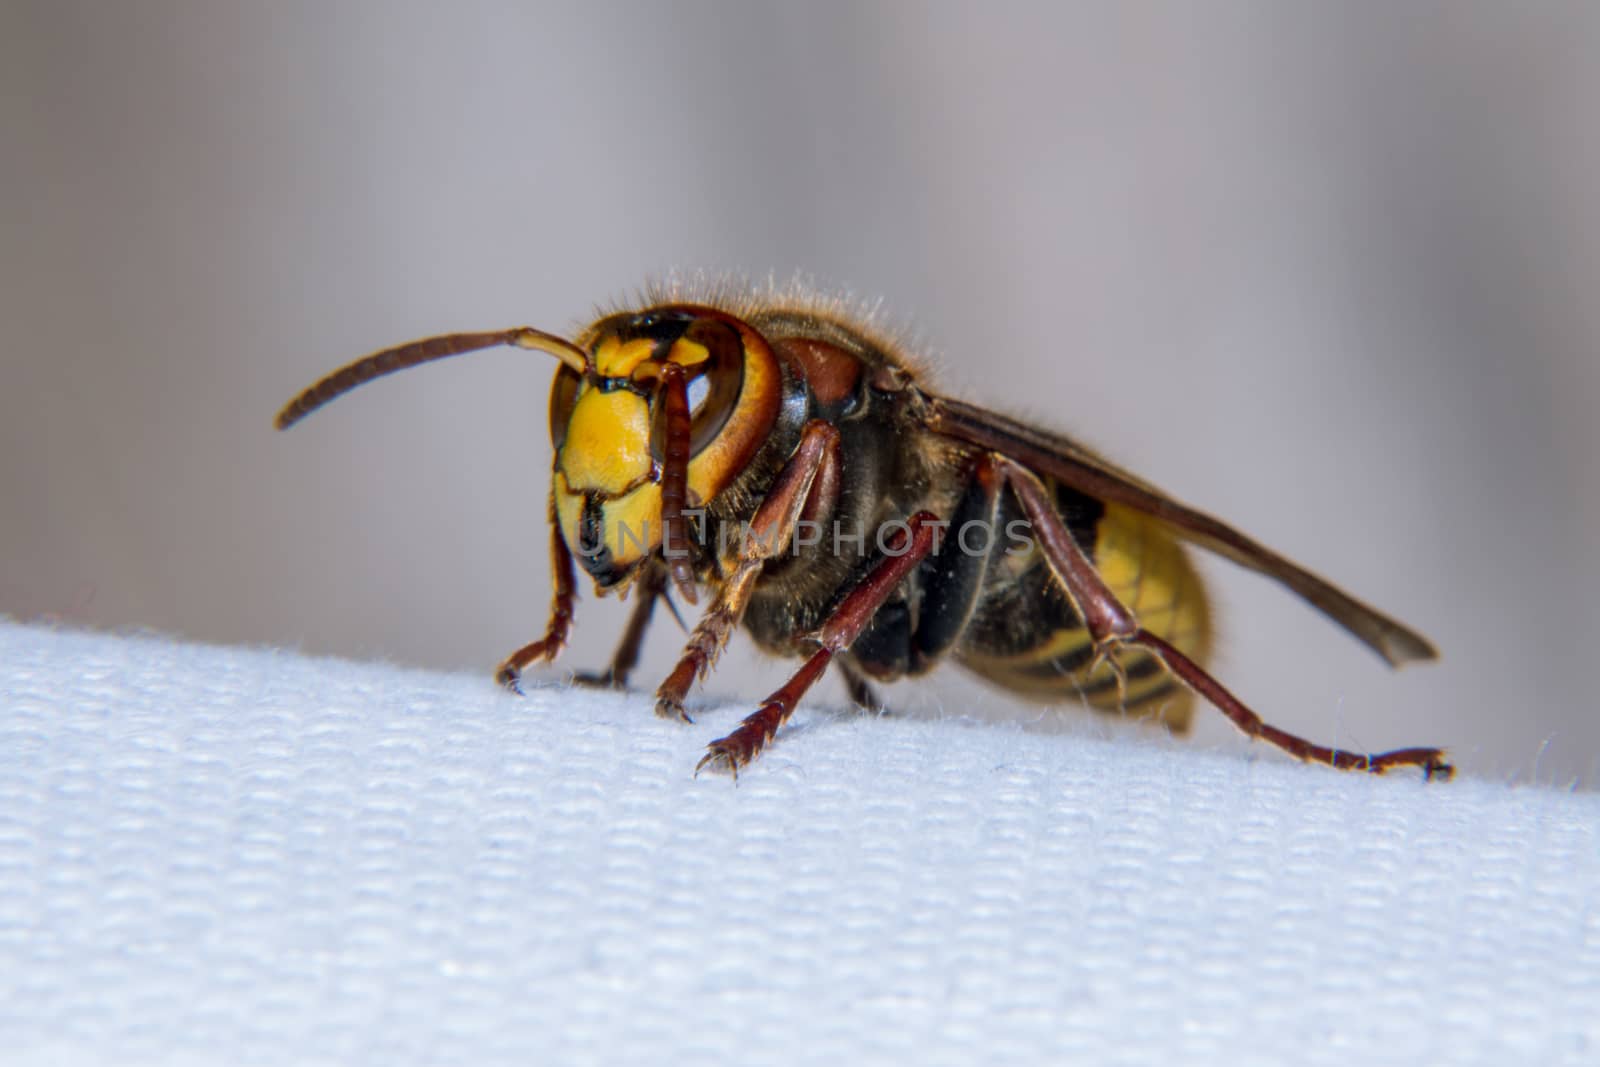 European hornet is a very large wasp